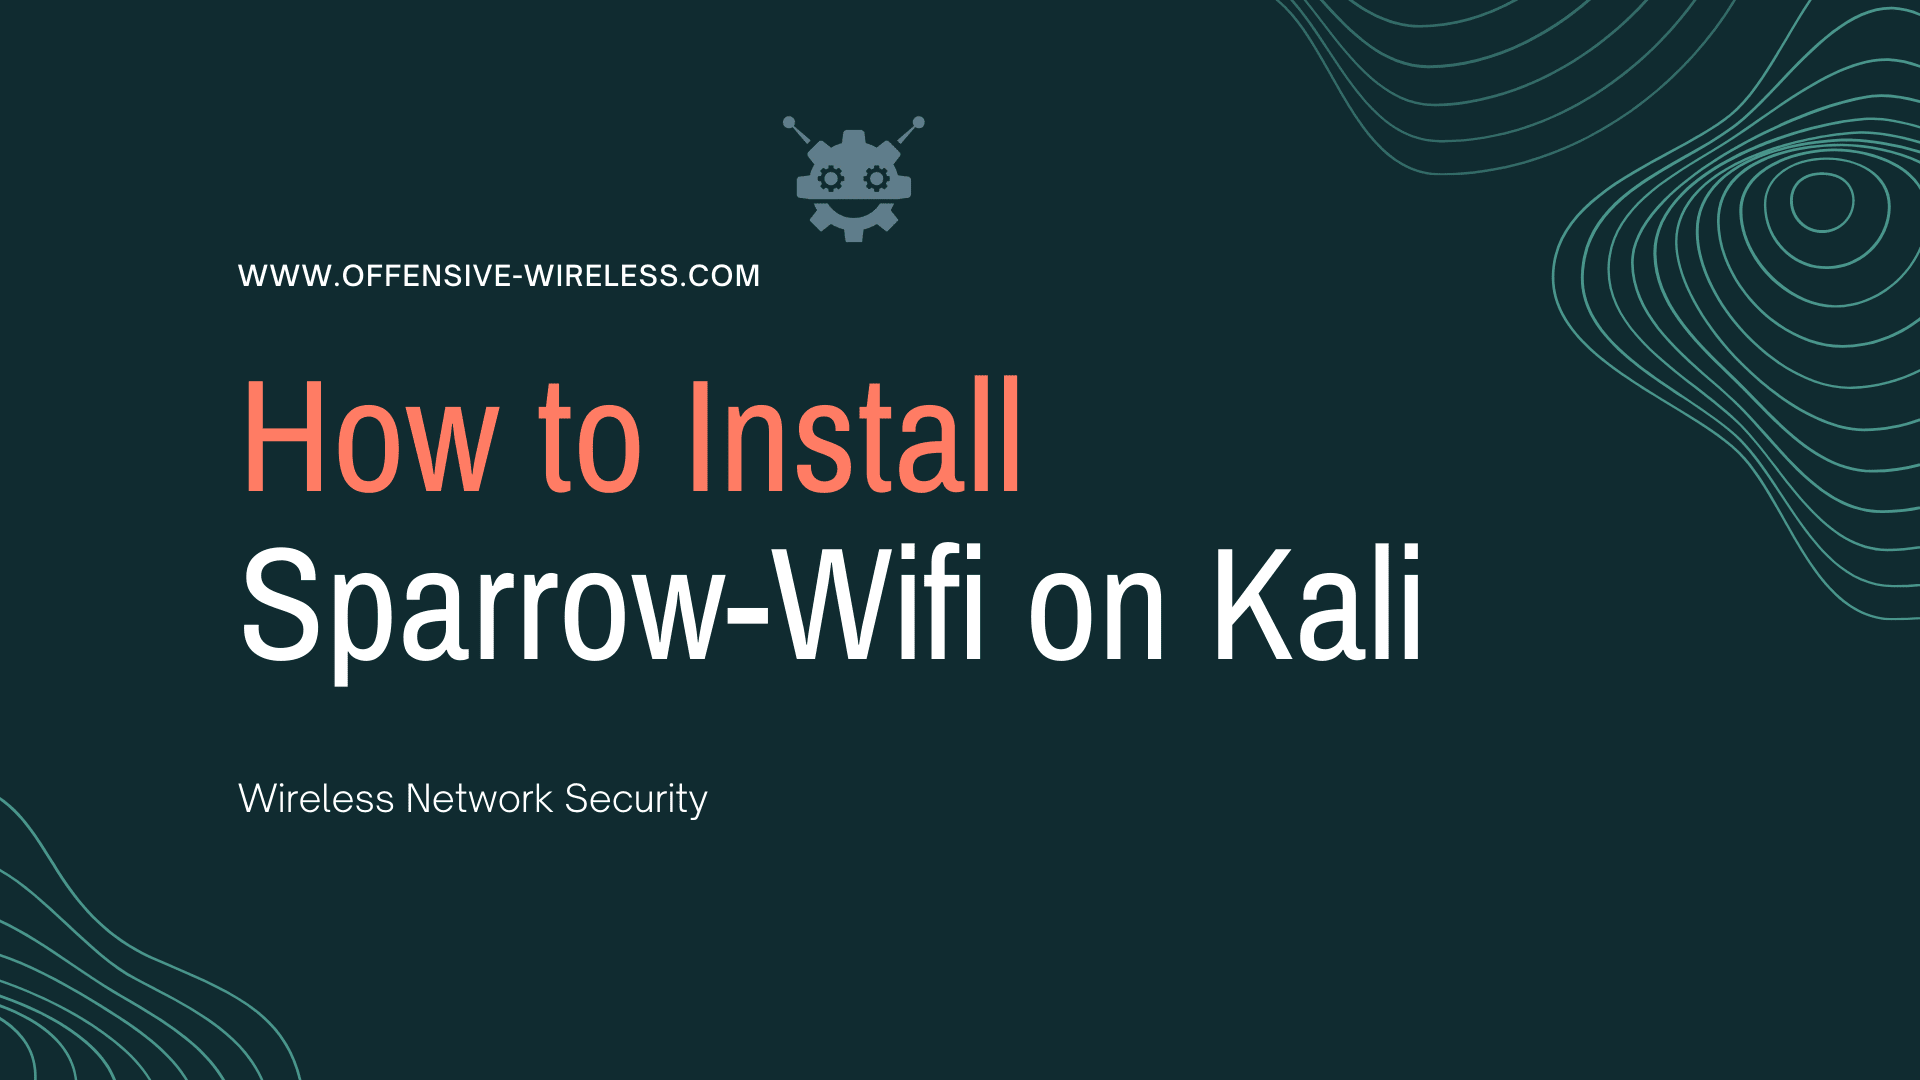 How to Install Sparrow-Wifi on Kali Linux